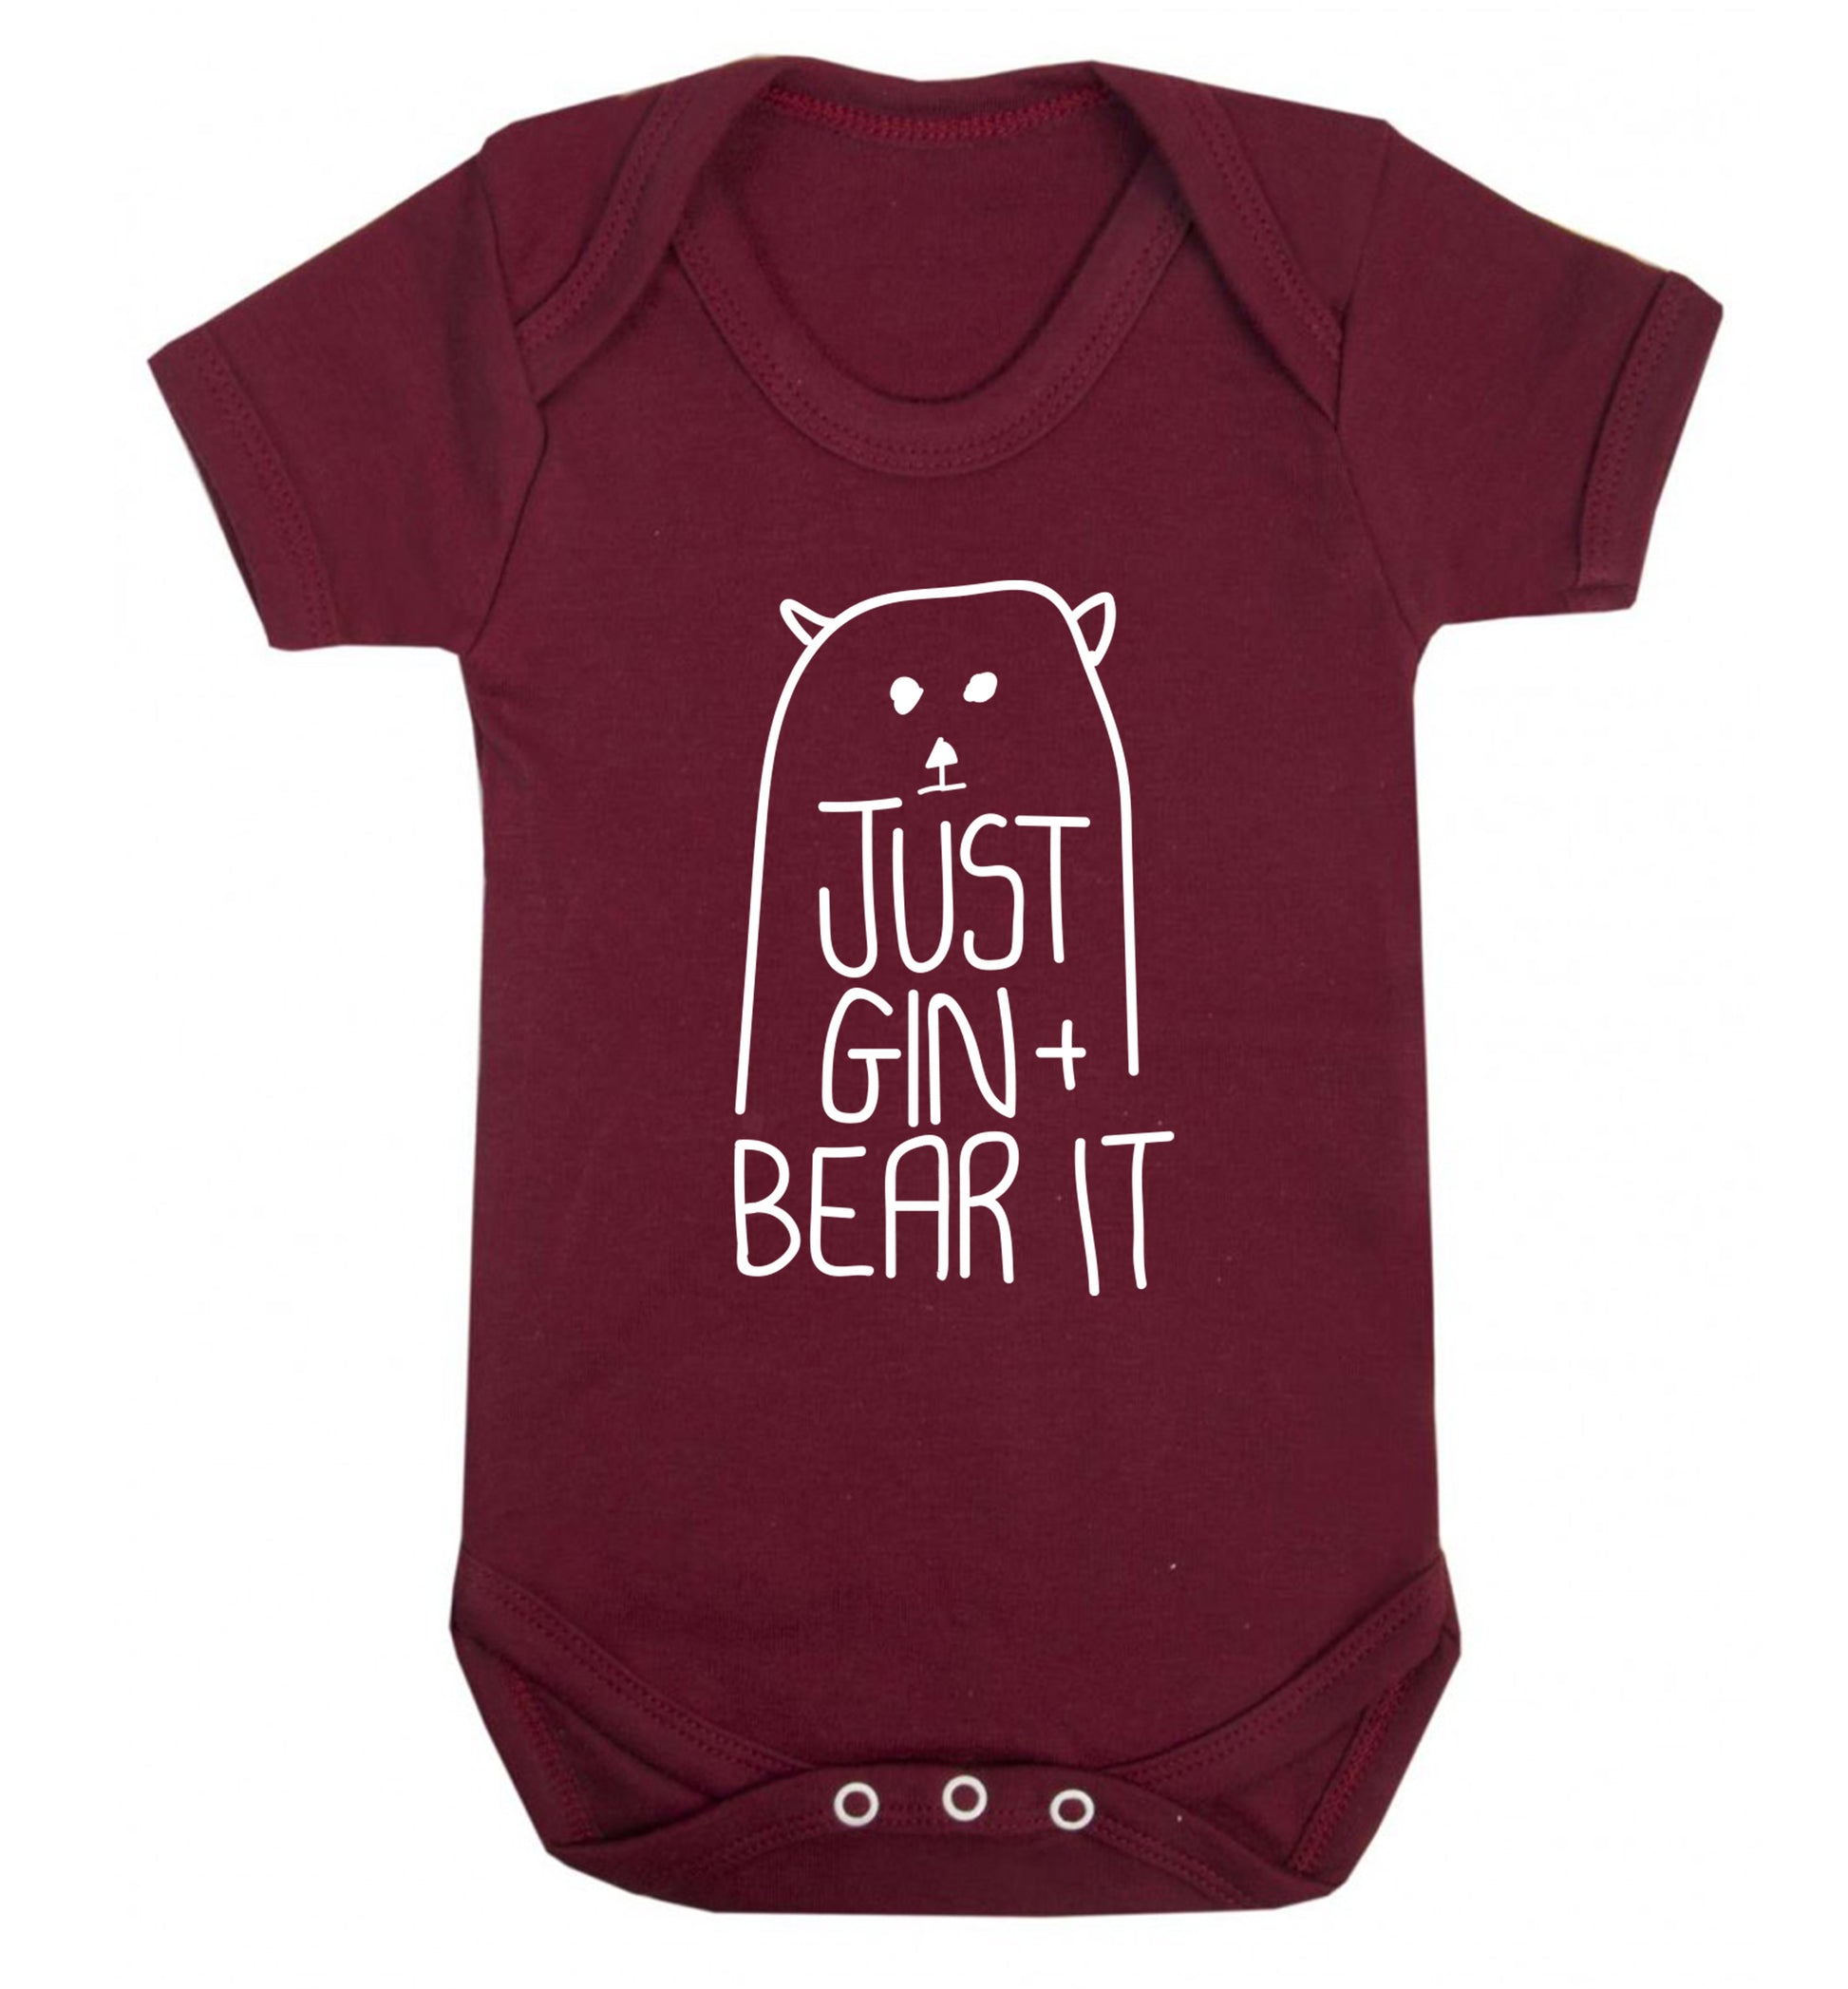 Just gin and bear it Baby Vest maroon 18-24 months